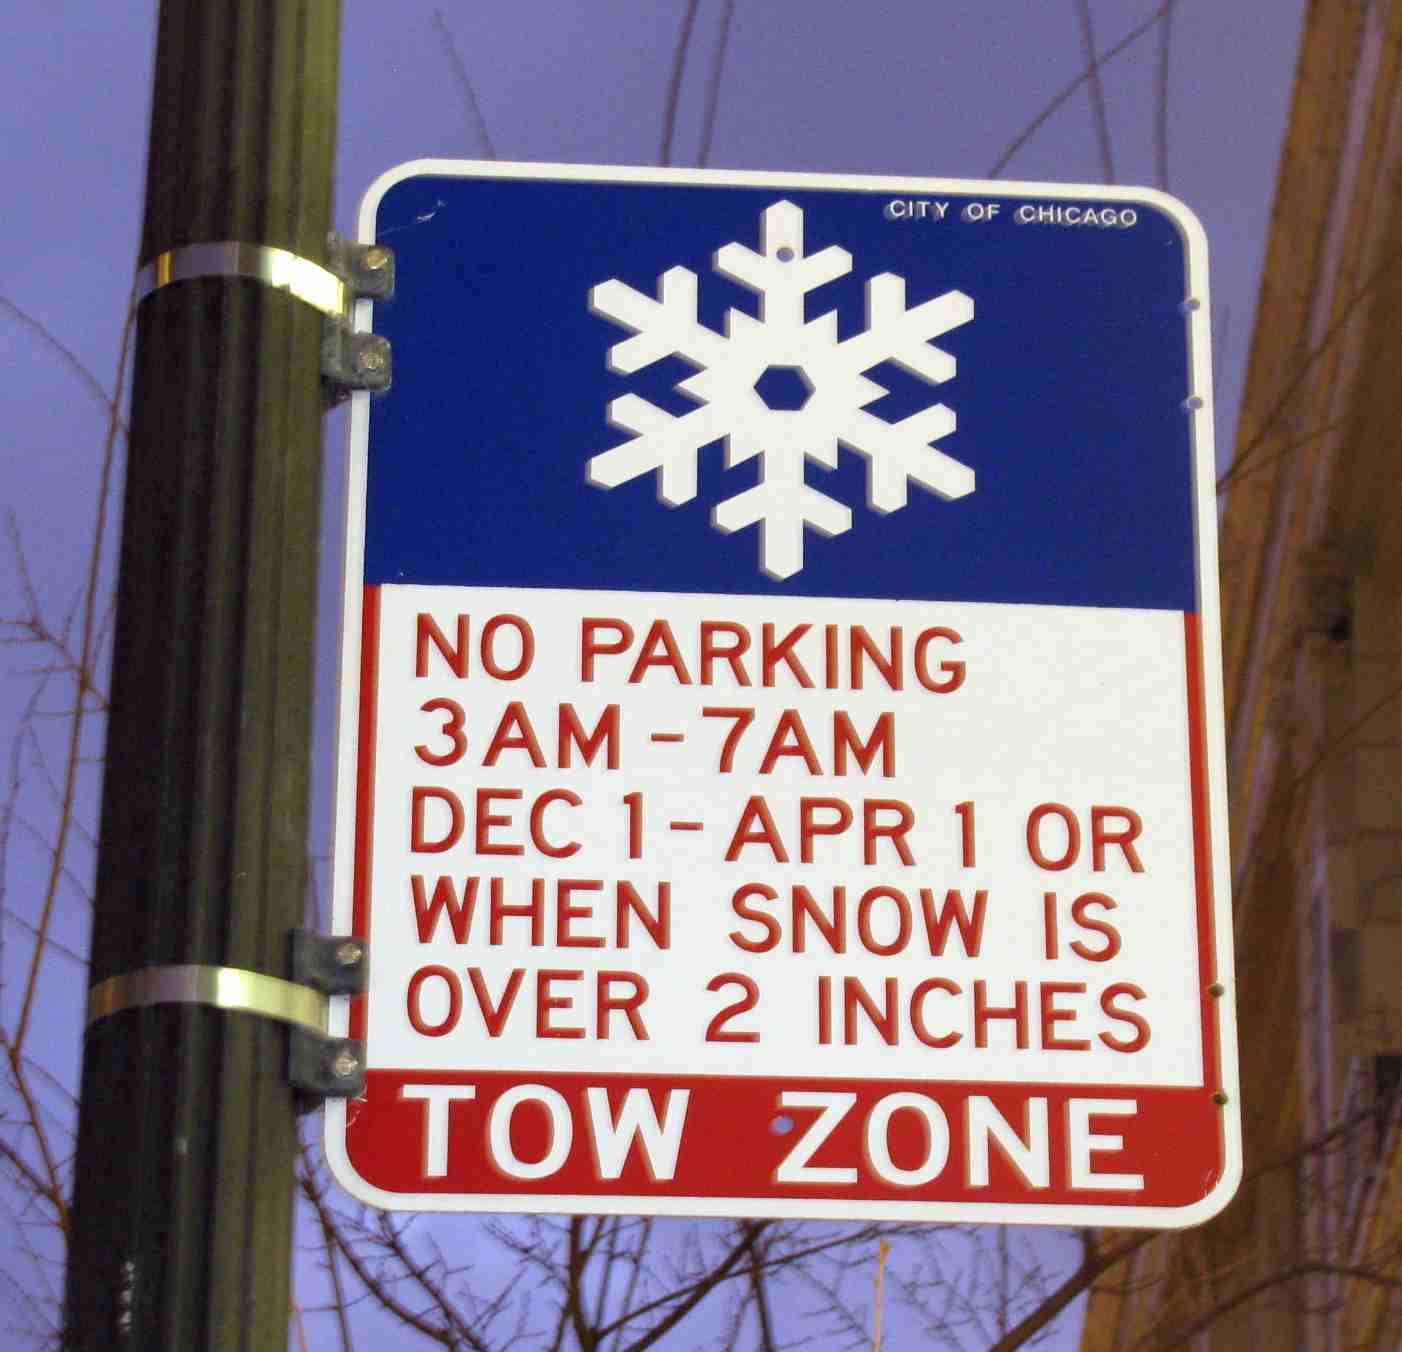 chicago no parking overnight (snow) sign